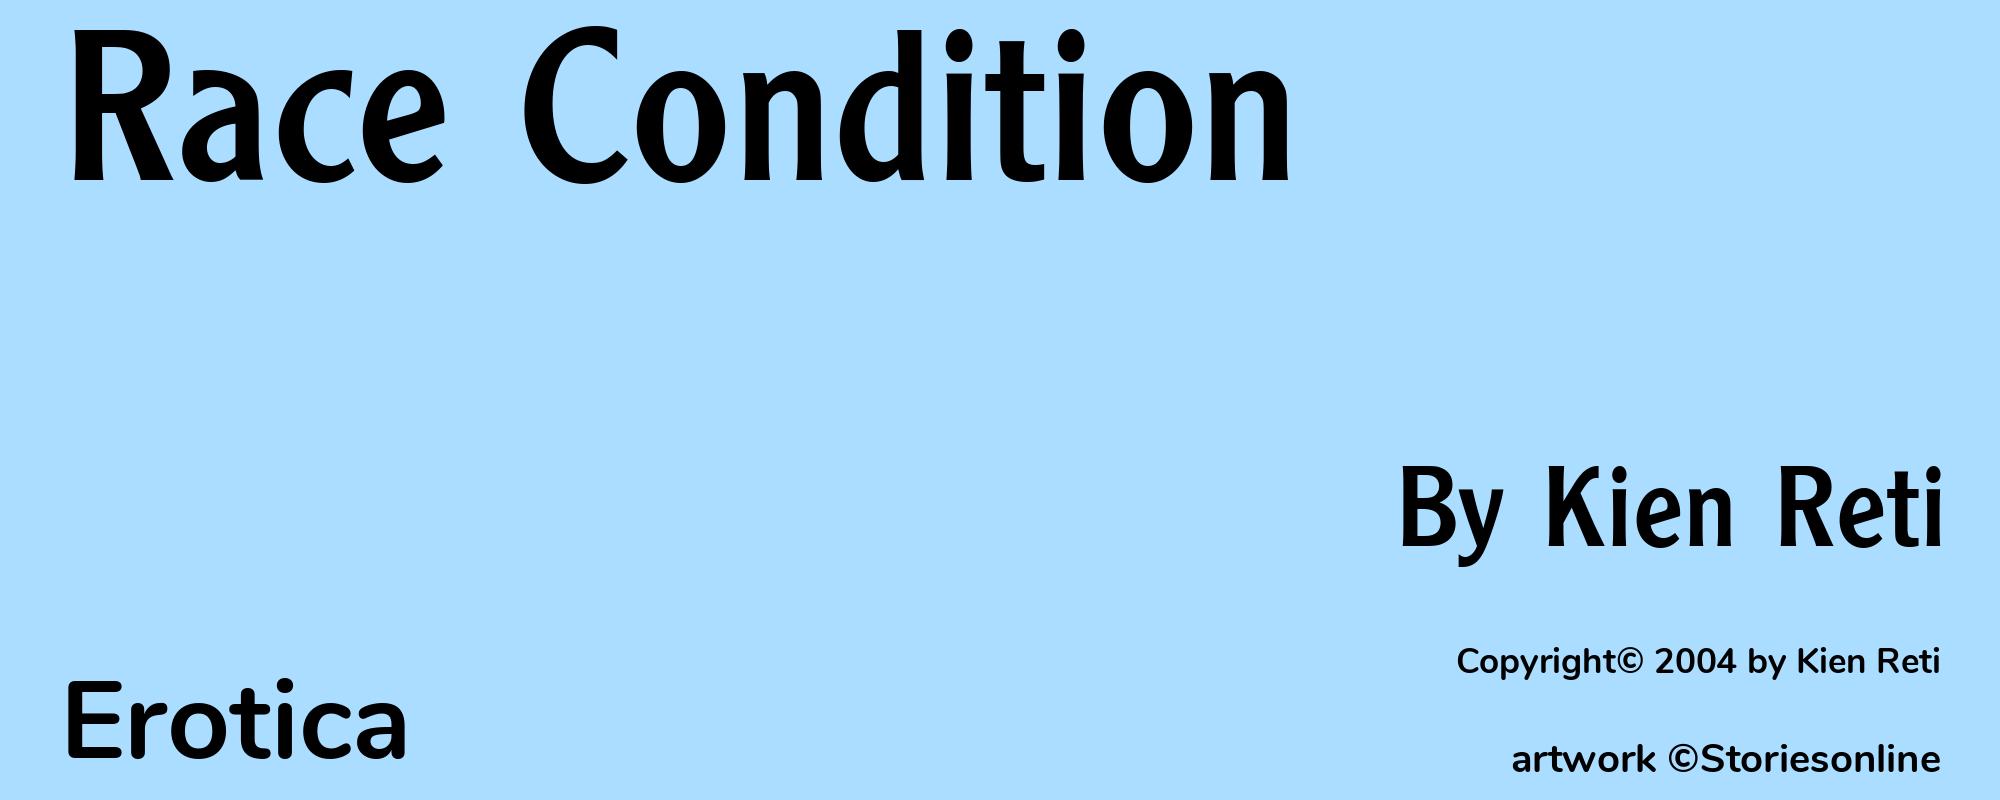 Race Condition - Cover